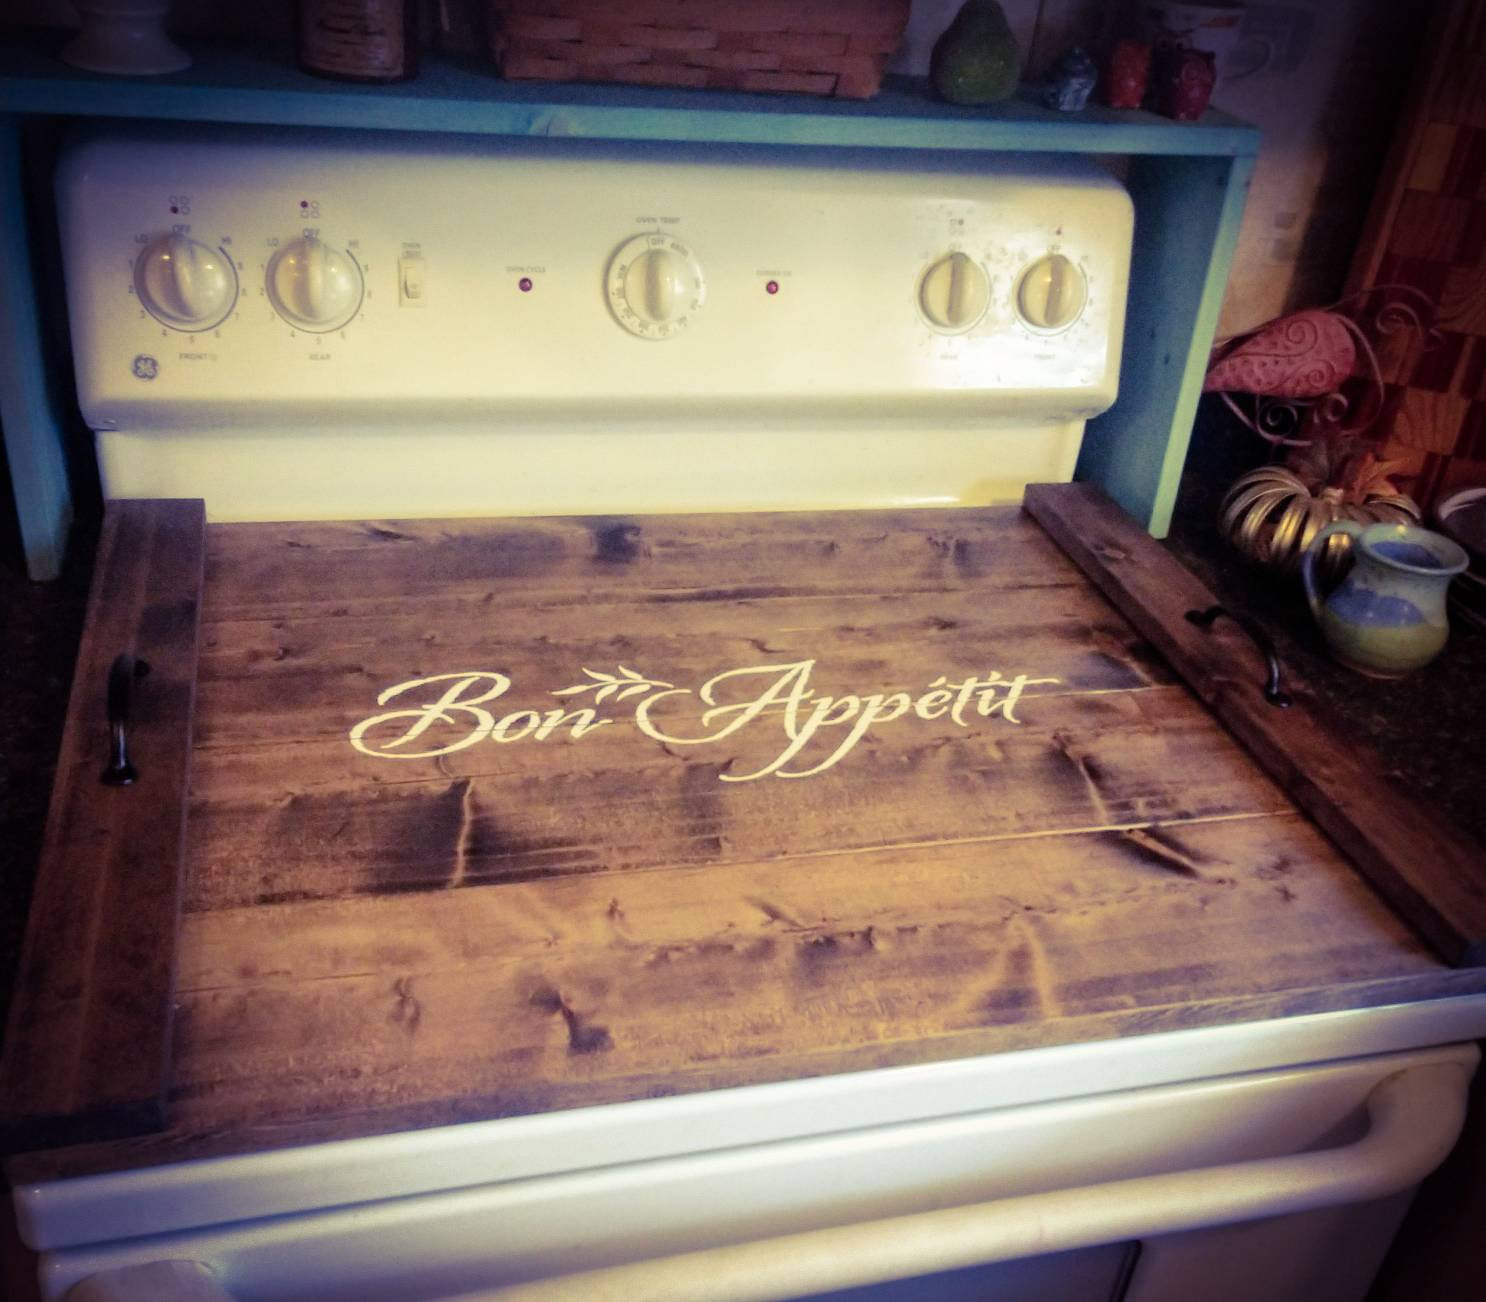 Farmhouse Stove Top Oven Cover Noodle Board, Stove Cover, Serving Tray